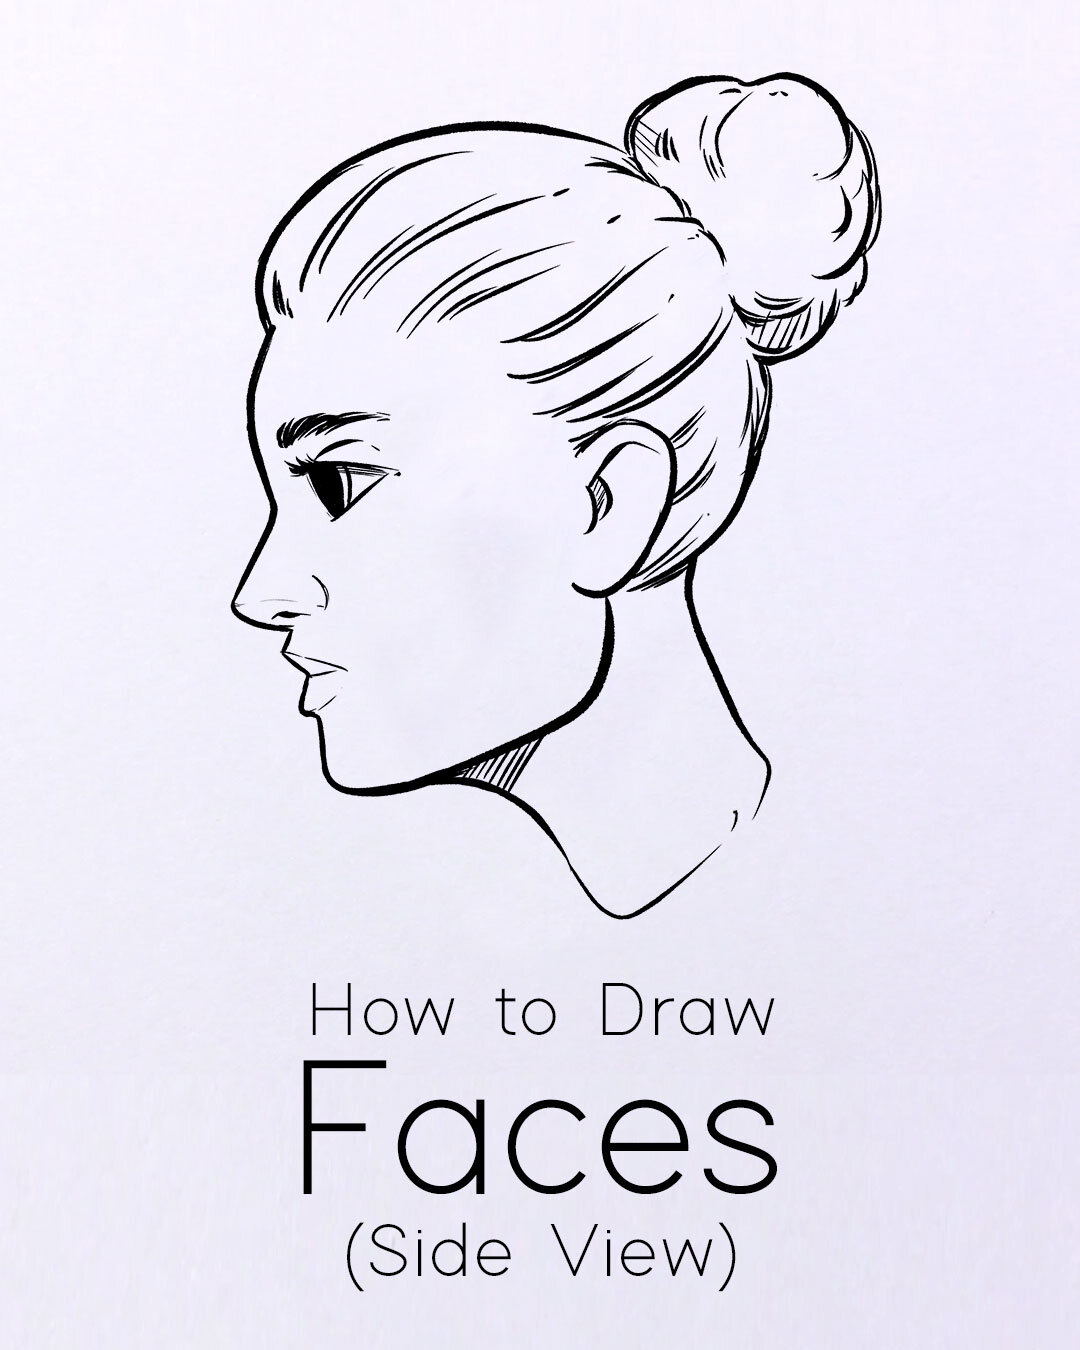 How to Draw Faces: Side View Free Worksheet & Tutorial